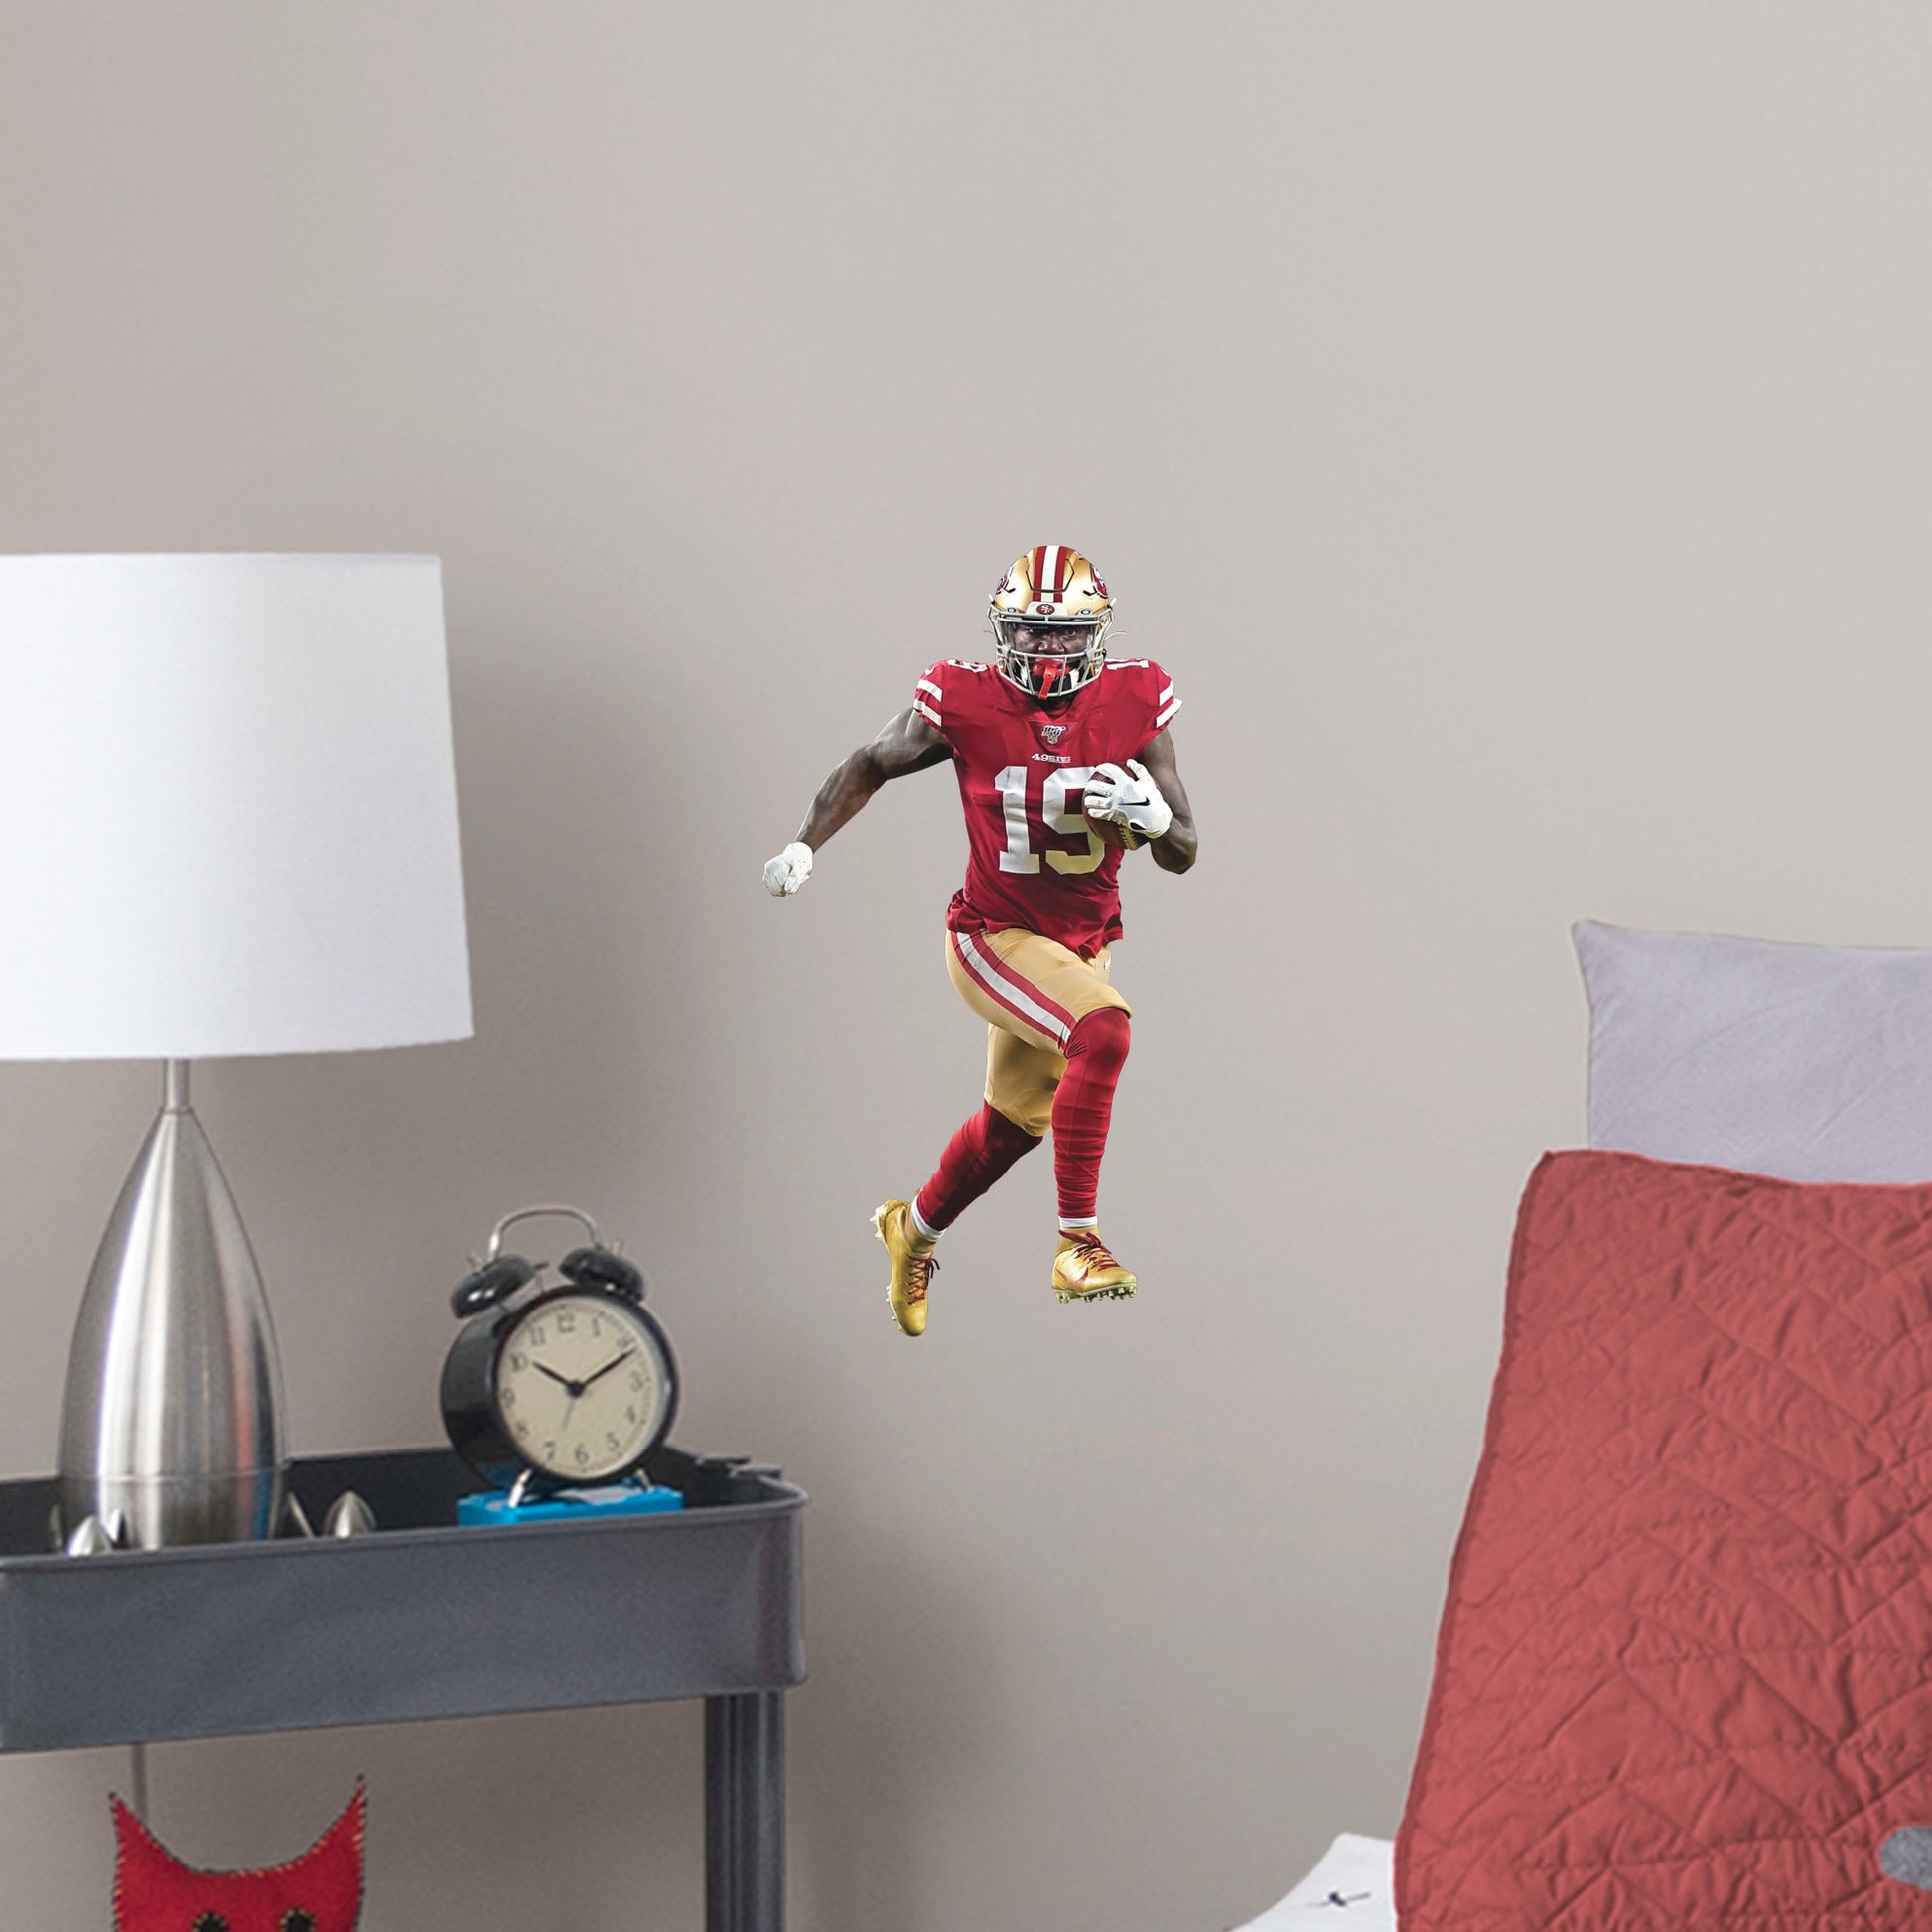 Large Athlete + 2 Decals (9"W x 17"H) Deebo Samuel is one of the most exciting players in the NFL and you can show your support with this high-quality removable wall decal! Place this durable vinyl decal on any wall and wide receiver Deebo can dominate your room, office, or man cave like he helps the San Francisco 49ers dominate the league! This decal can be easily applied and removed on almost any surface, so this speedster can follow you everywhere you go! Let's go, Niners!